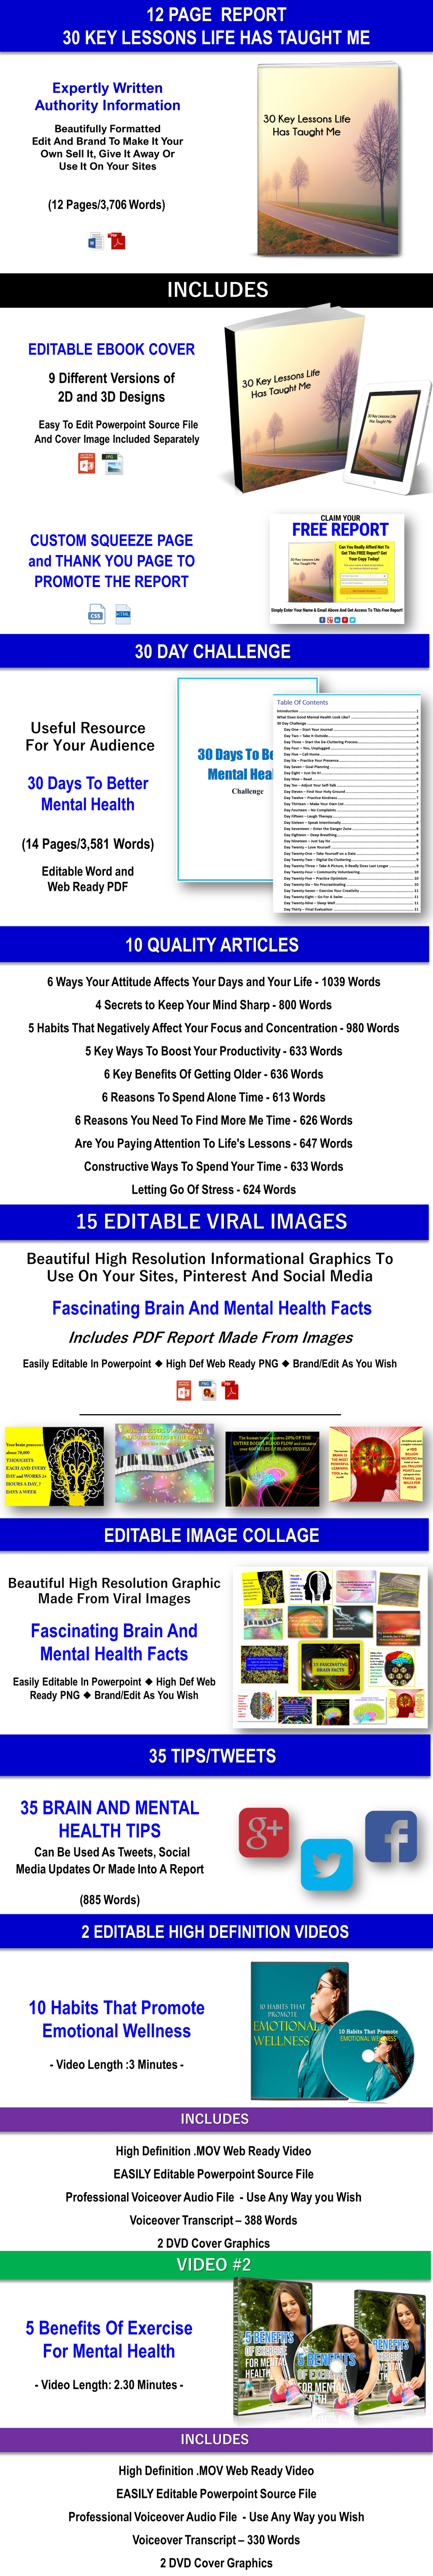 Your Best Mental Health Giant PLR Package 3